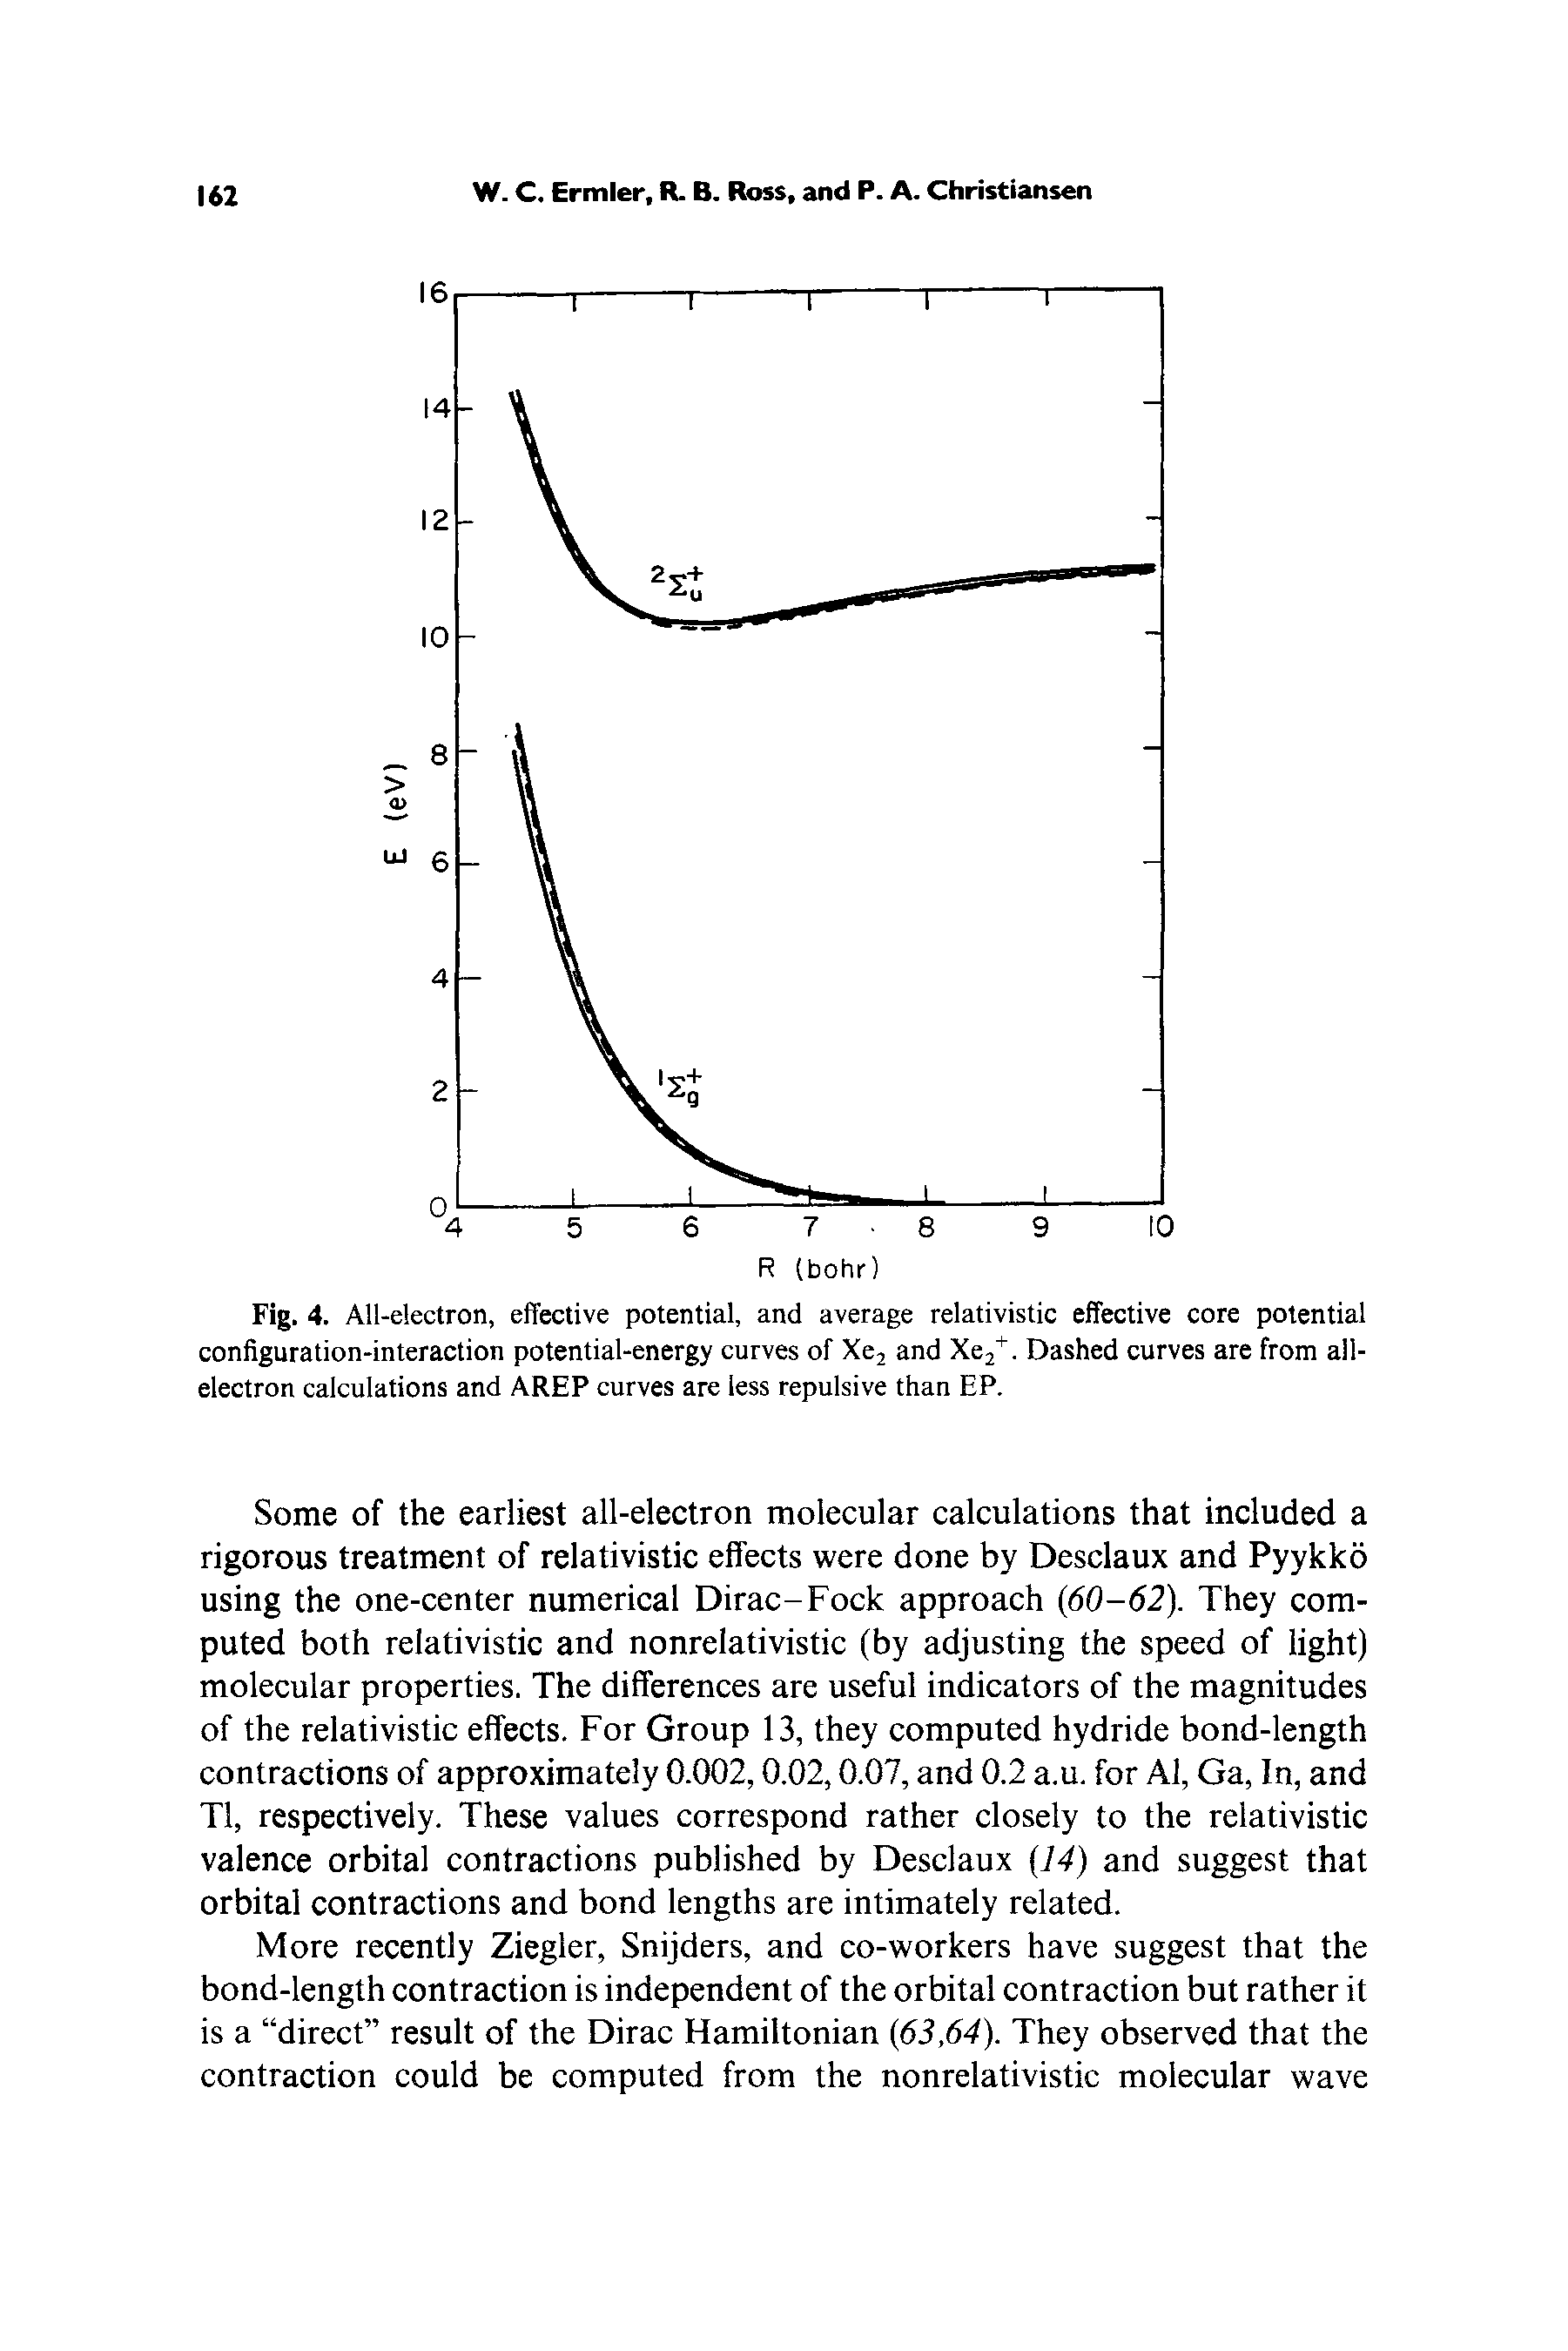 Fig. 4. All-electron, effective potential, and average relativistic effective core potential configuration-interaction potential-energy curves of Xe2 and Xe2+. Dashed curves are from allelectron calculations and AREP curves are less repulsive than EP.